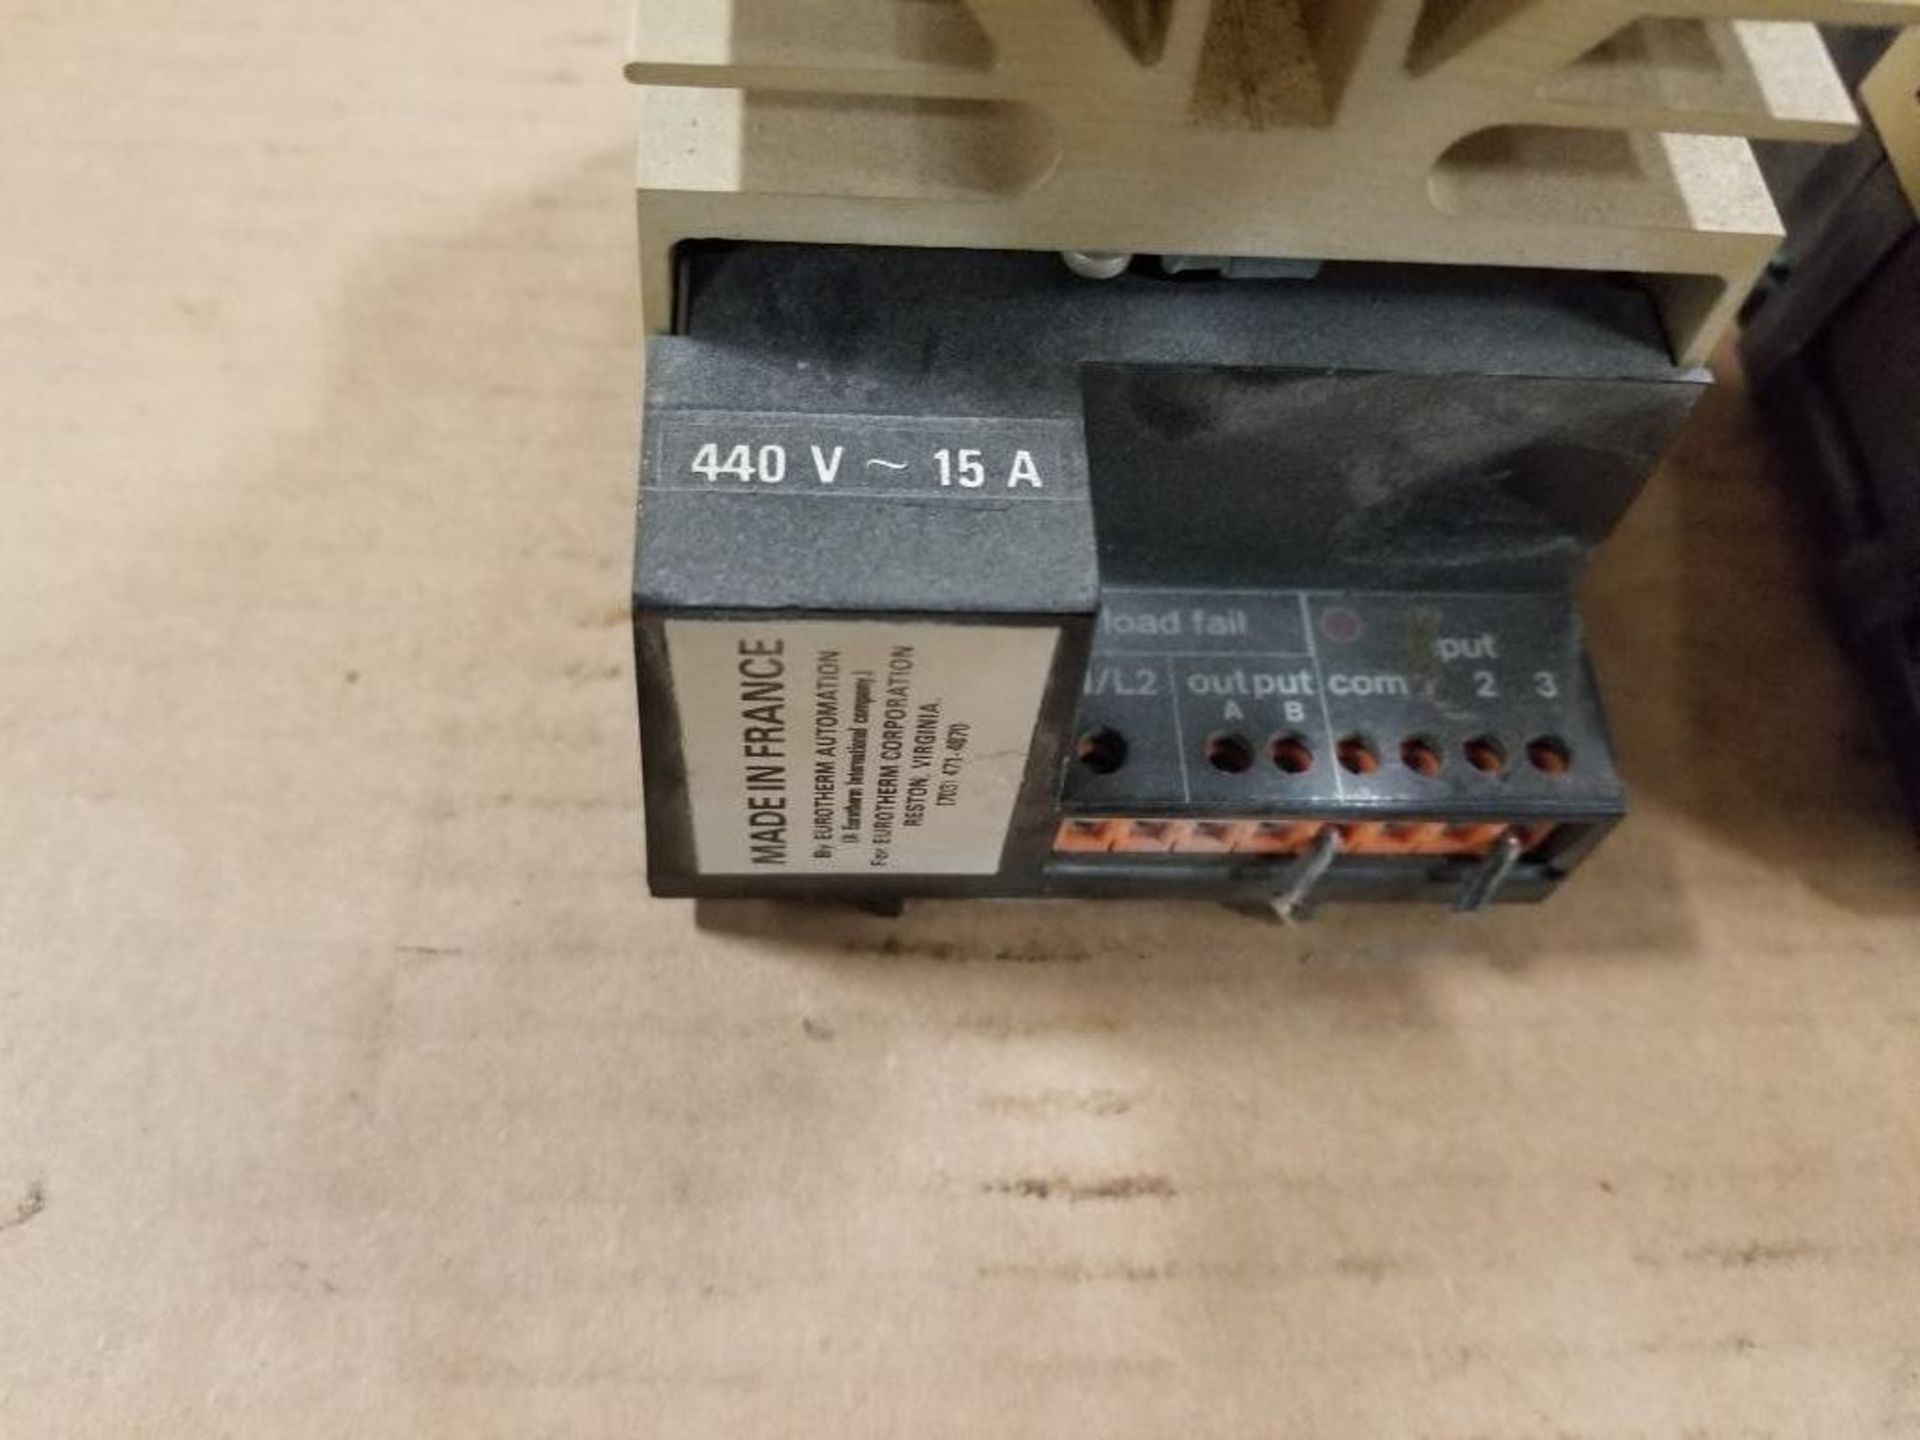 Qty 3 - Eurotherm 425/15A/440V//LGC/on-off// current controller. Ser # 8649-5111. - Image 9 of 12